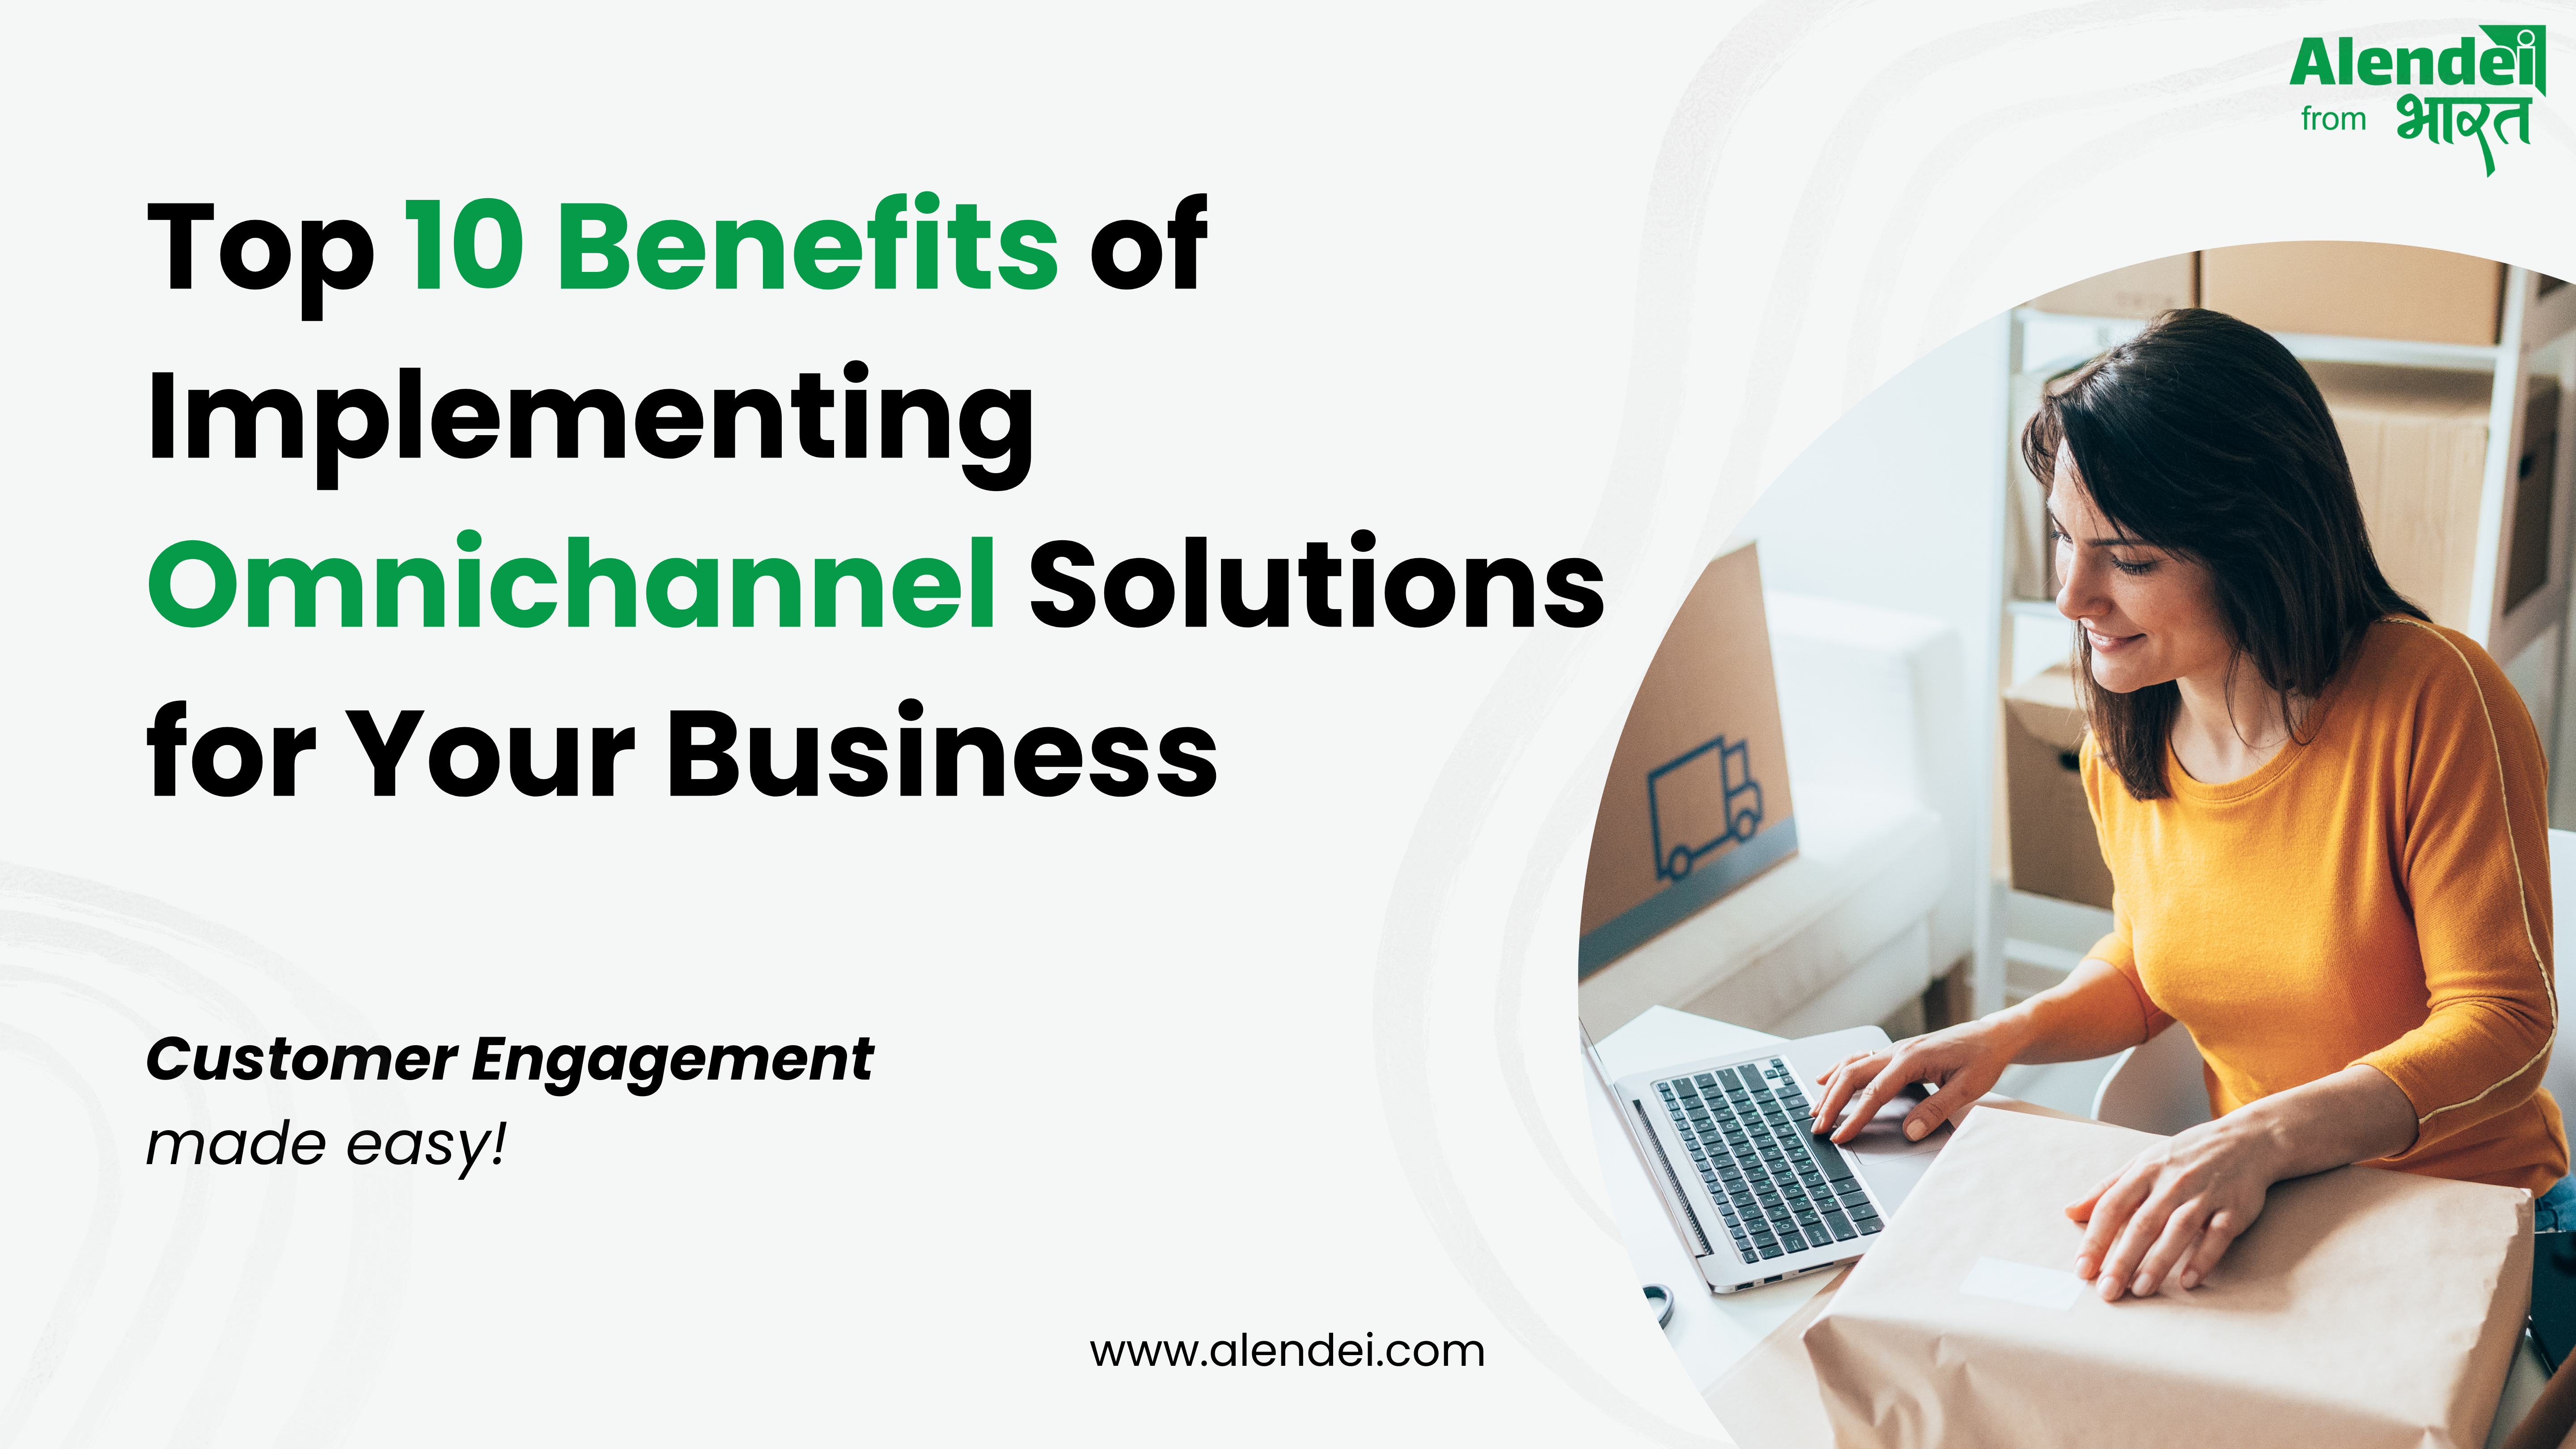 Top 10 Benefits of Implementing Omnichannel Solutions for Your Business